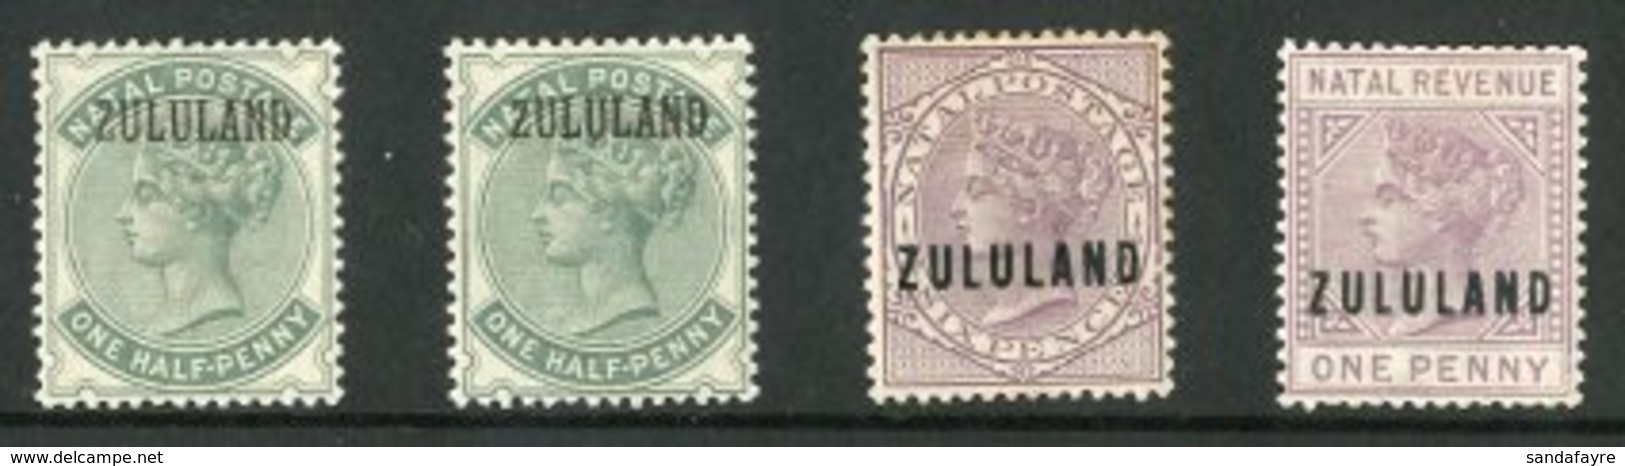 ZULULAND Overprints On Natal 1888 ½d Dull Green With And Without Stop, 1893 6d Dull Purple, And Postal Fiscal 1891 1d, F - Ohne Zuordnung